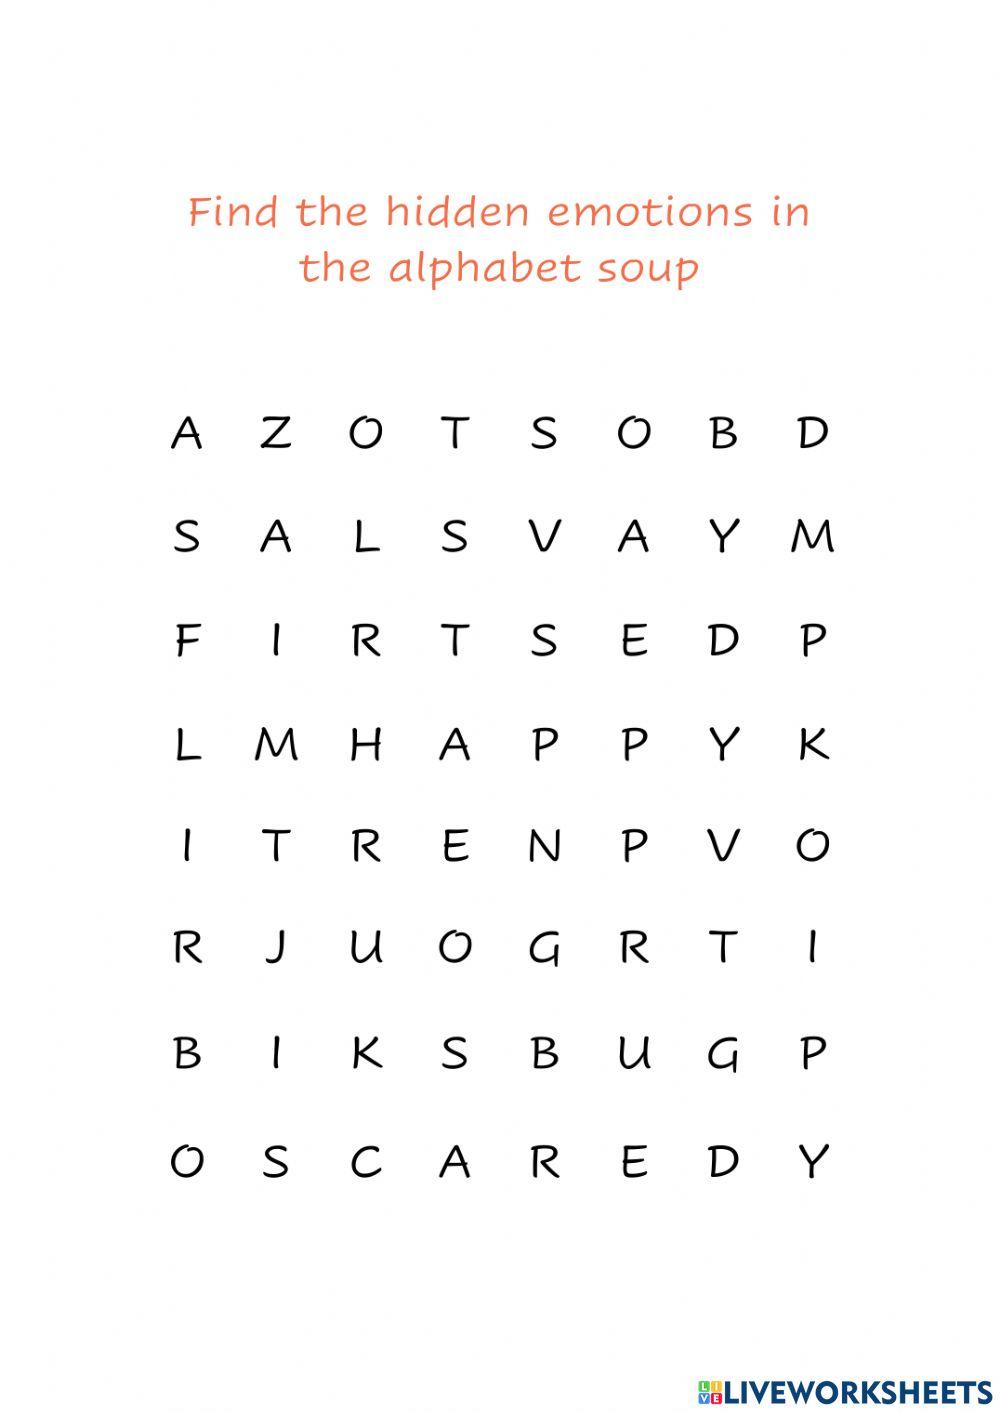 Emotions wordsearch